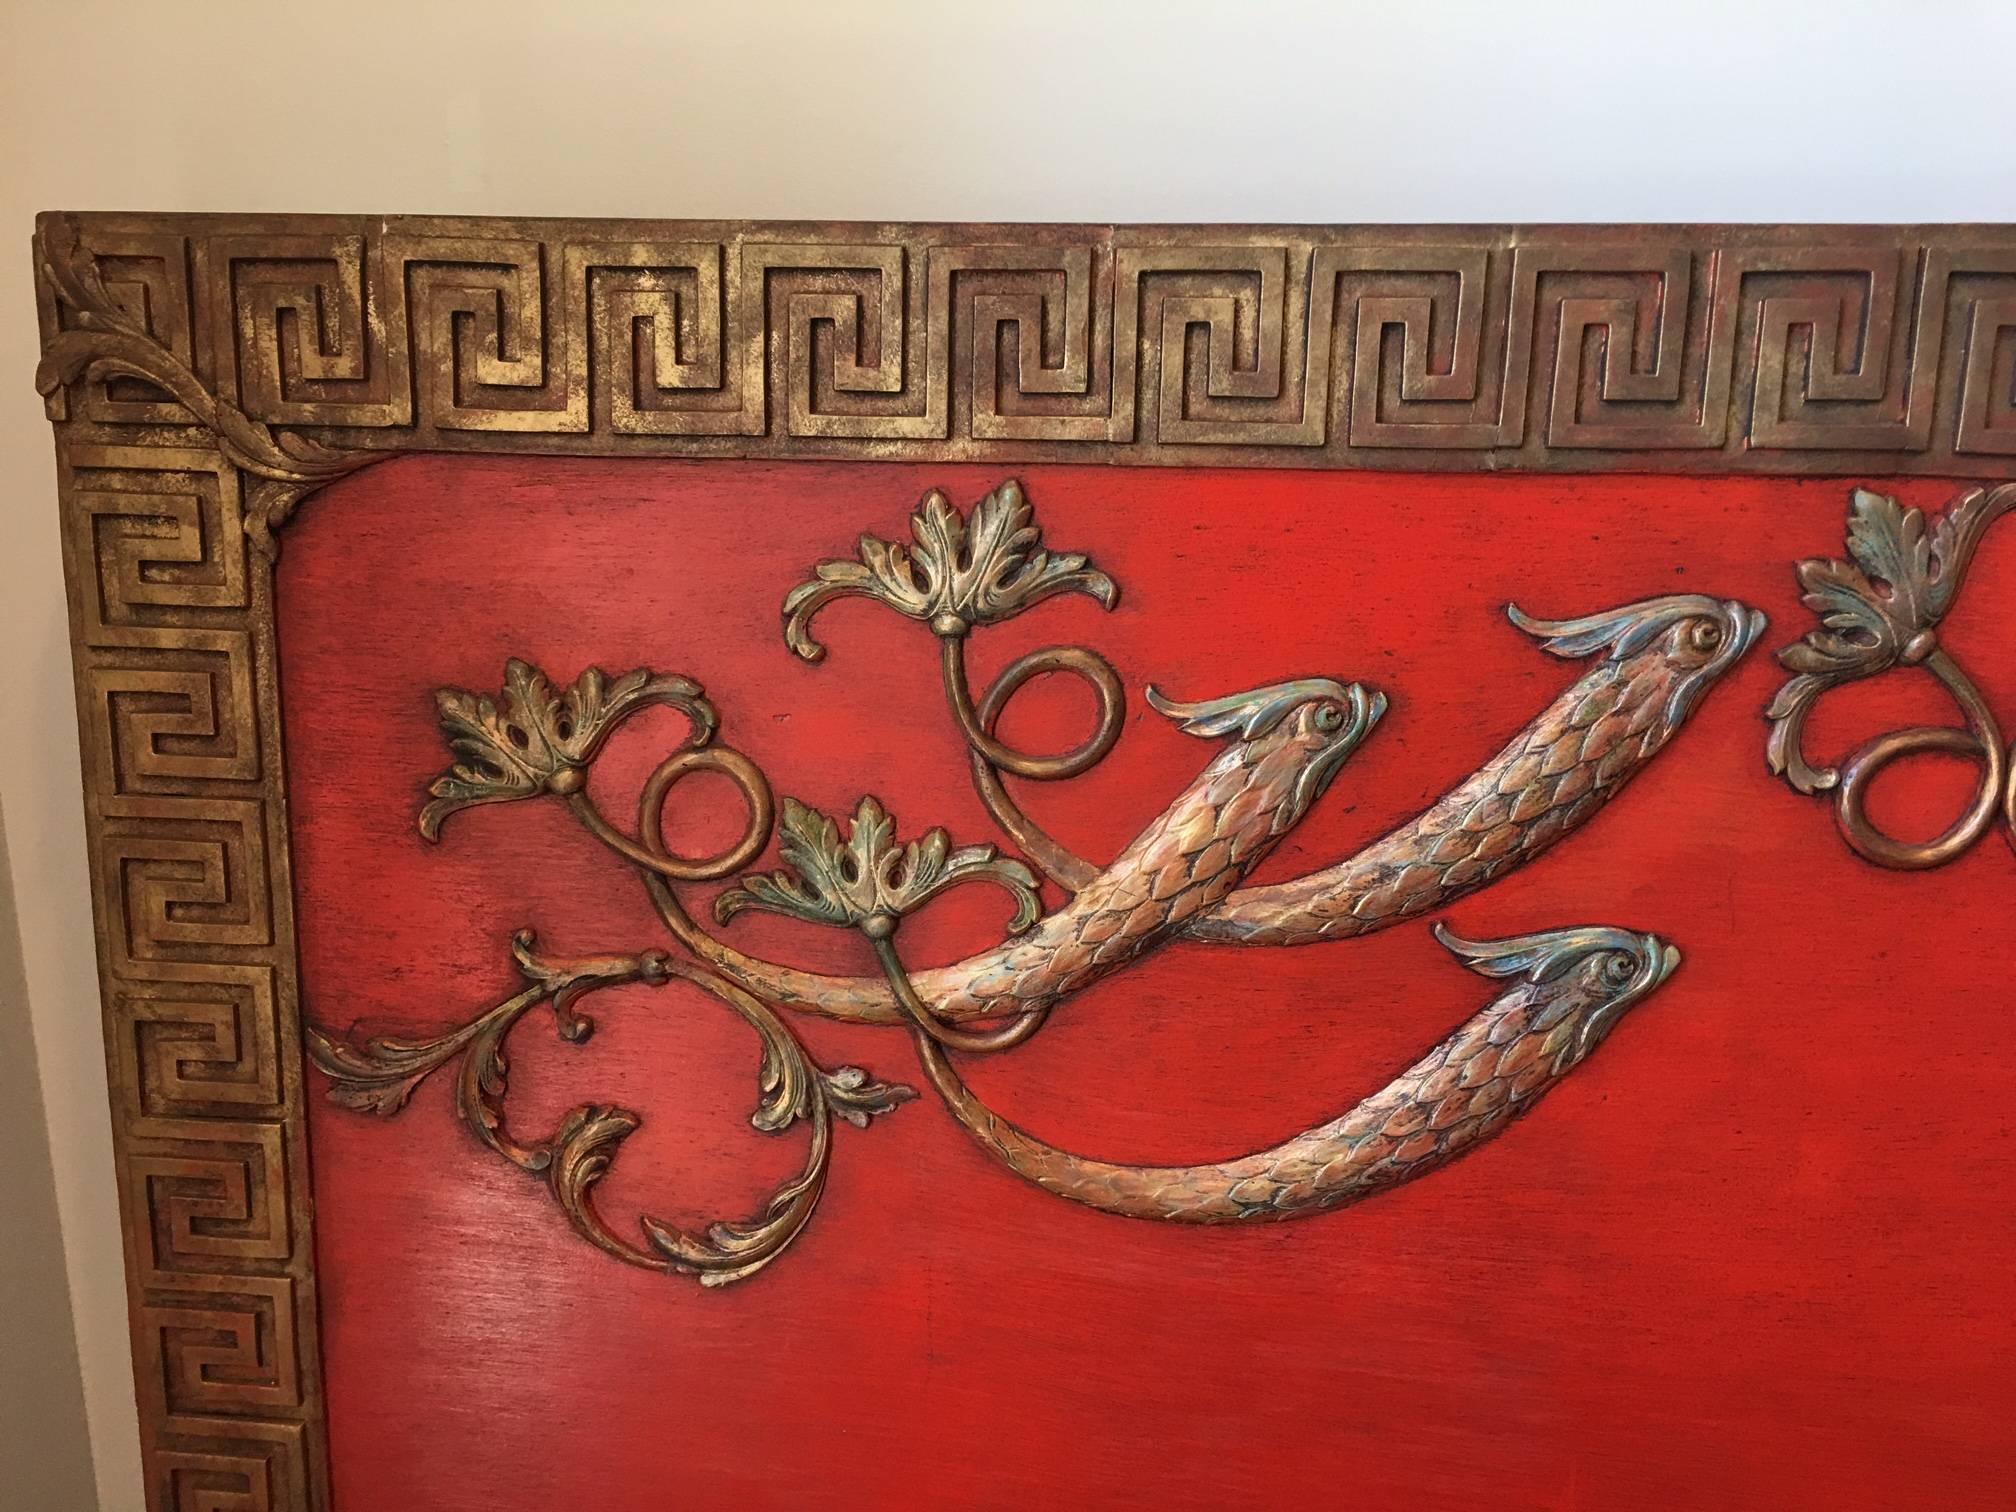 This piece is so striking I gasped when I saw it. It is beautiful queen sized wooden headboard with applied Greek Key, leaves, and fish/birds/dragon like creatures in a bronze tone. This headboard is in perfect vintage condition and is incredible